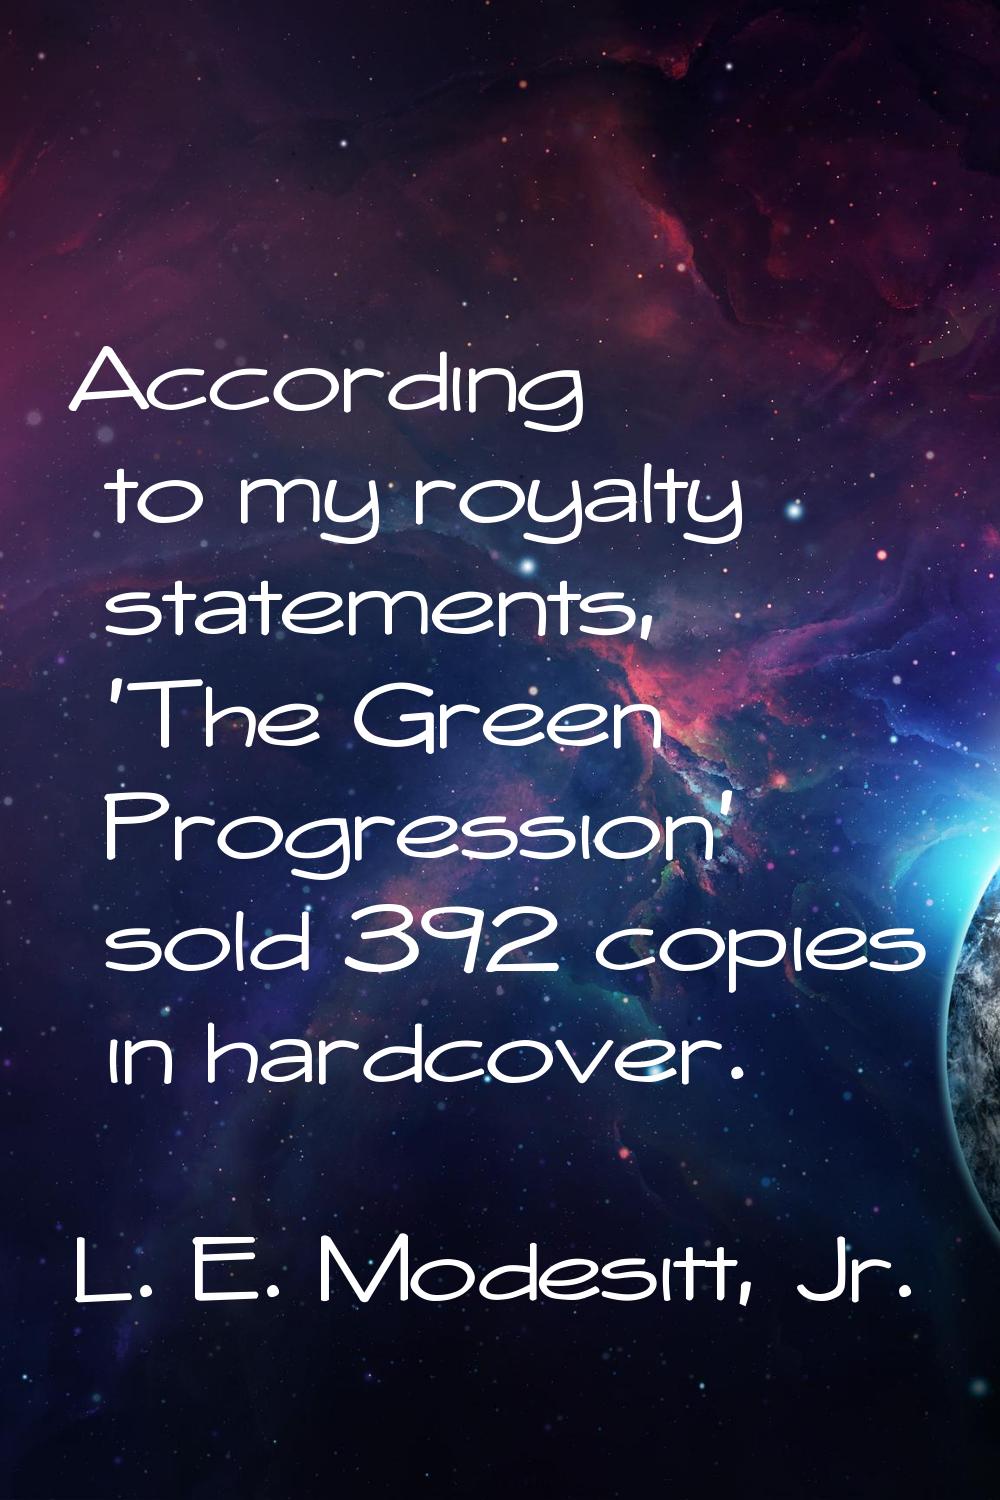 According to my royalty statements, 'The Green Progression' sold 392 copies in hardcover.